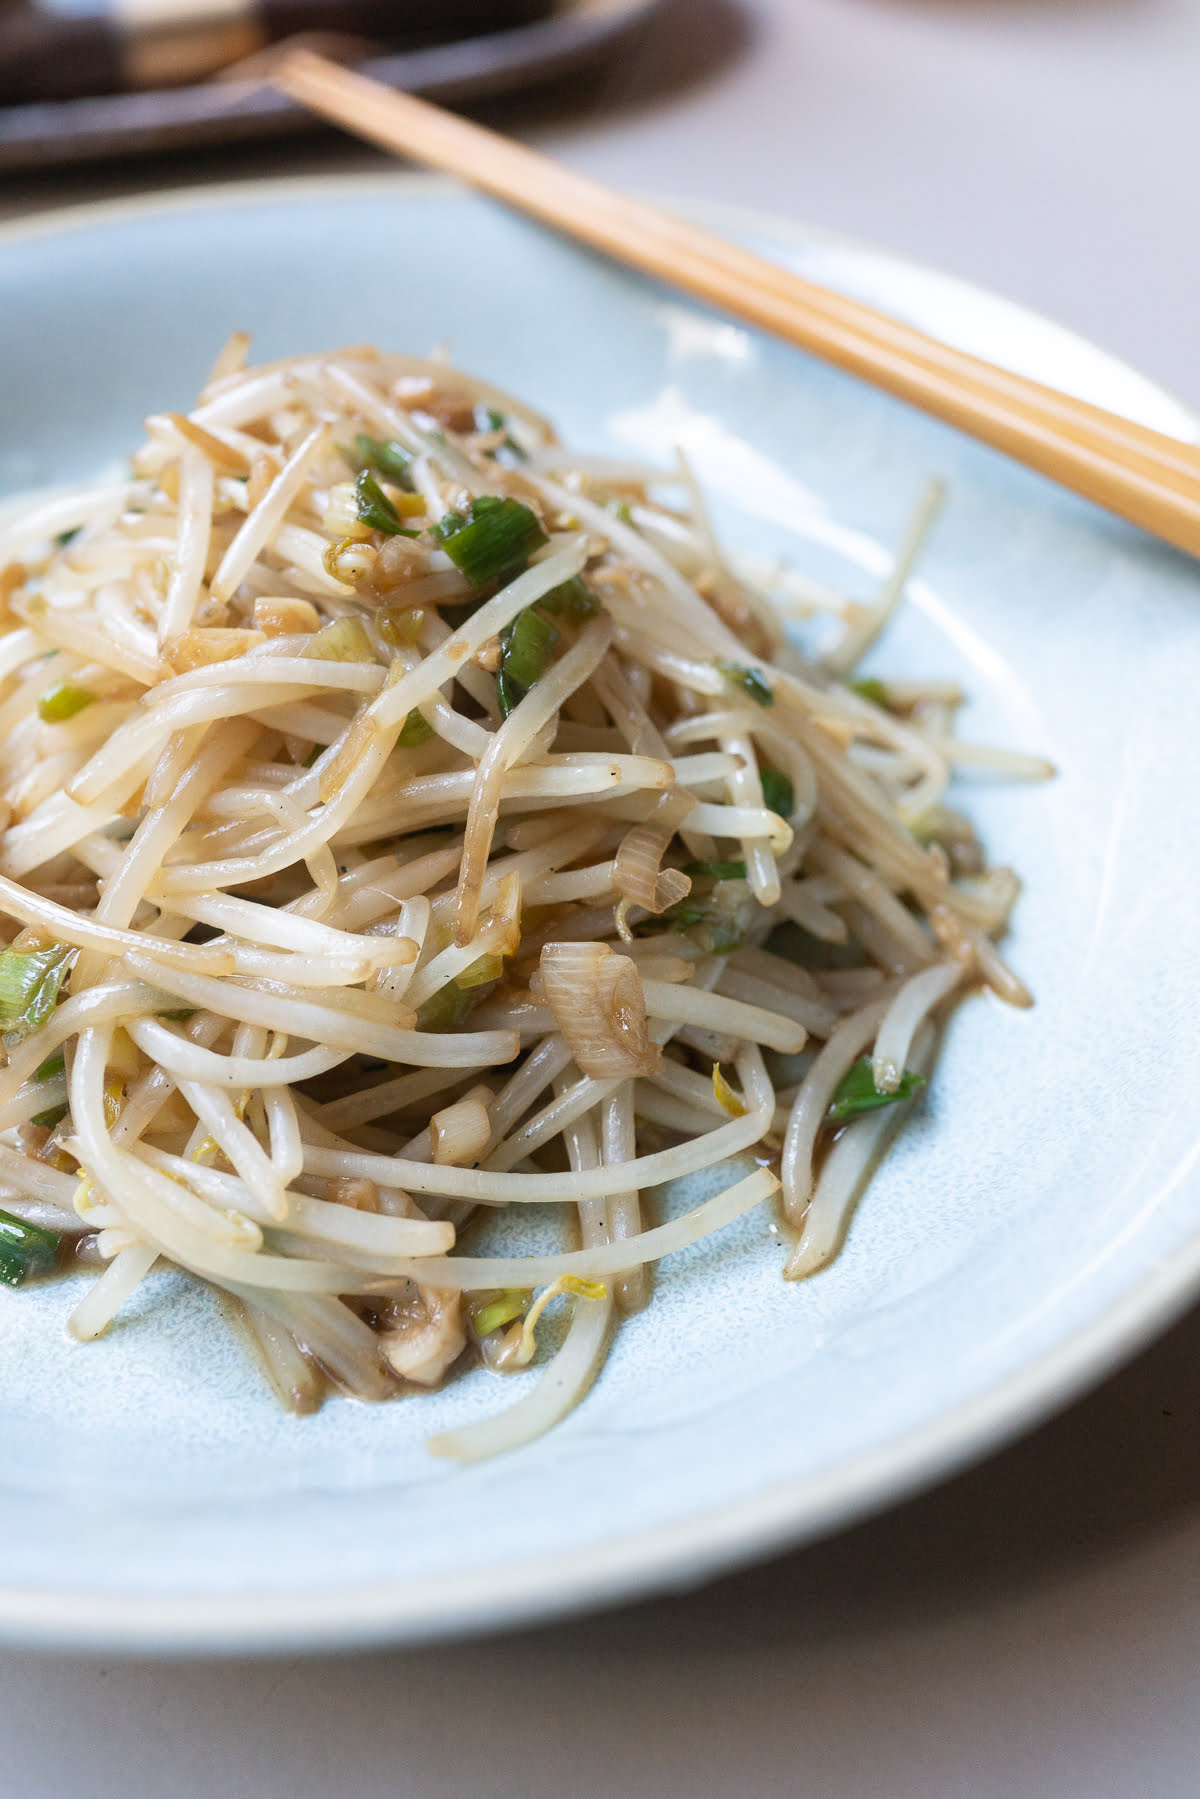 A plate of bean sprouts stir fry, ready to eat.